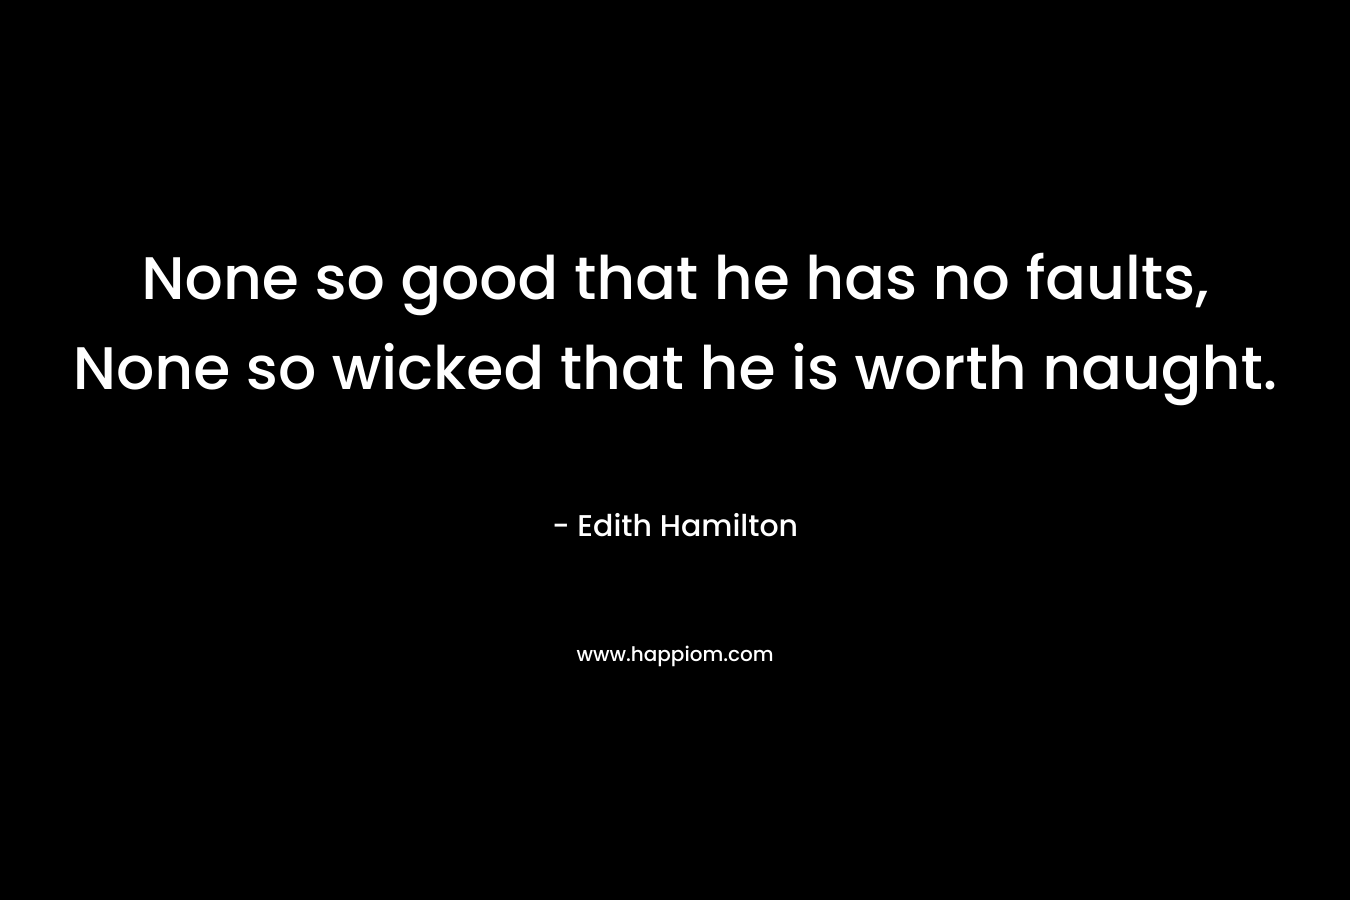 None so good that he has no faults, None so wicked that he is worth naught. – Edith Hamilton